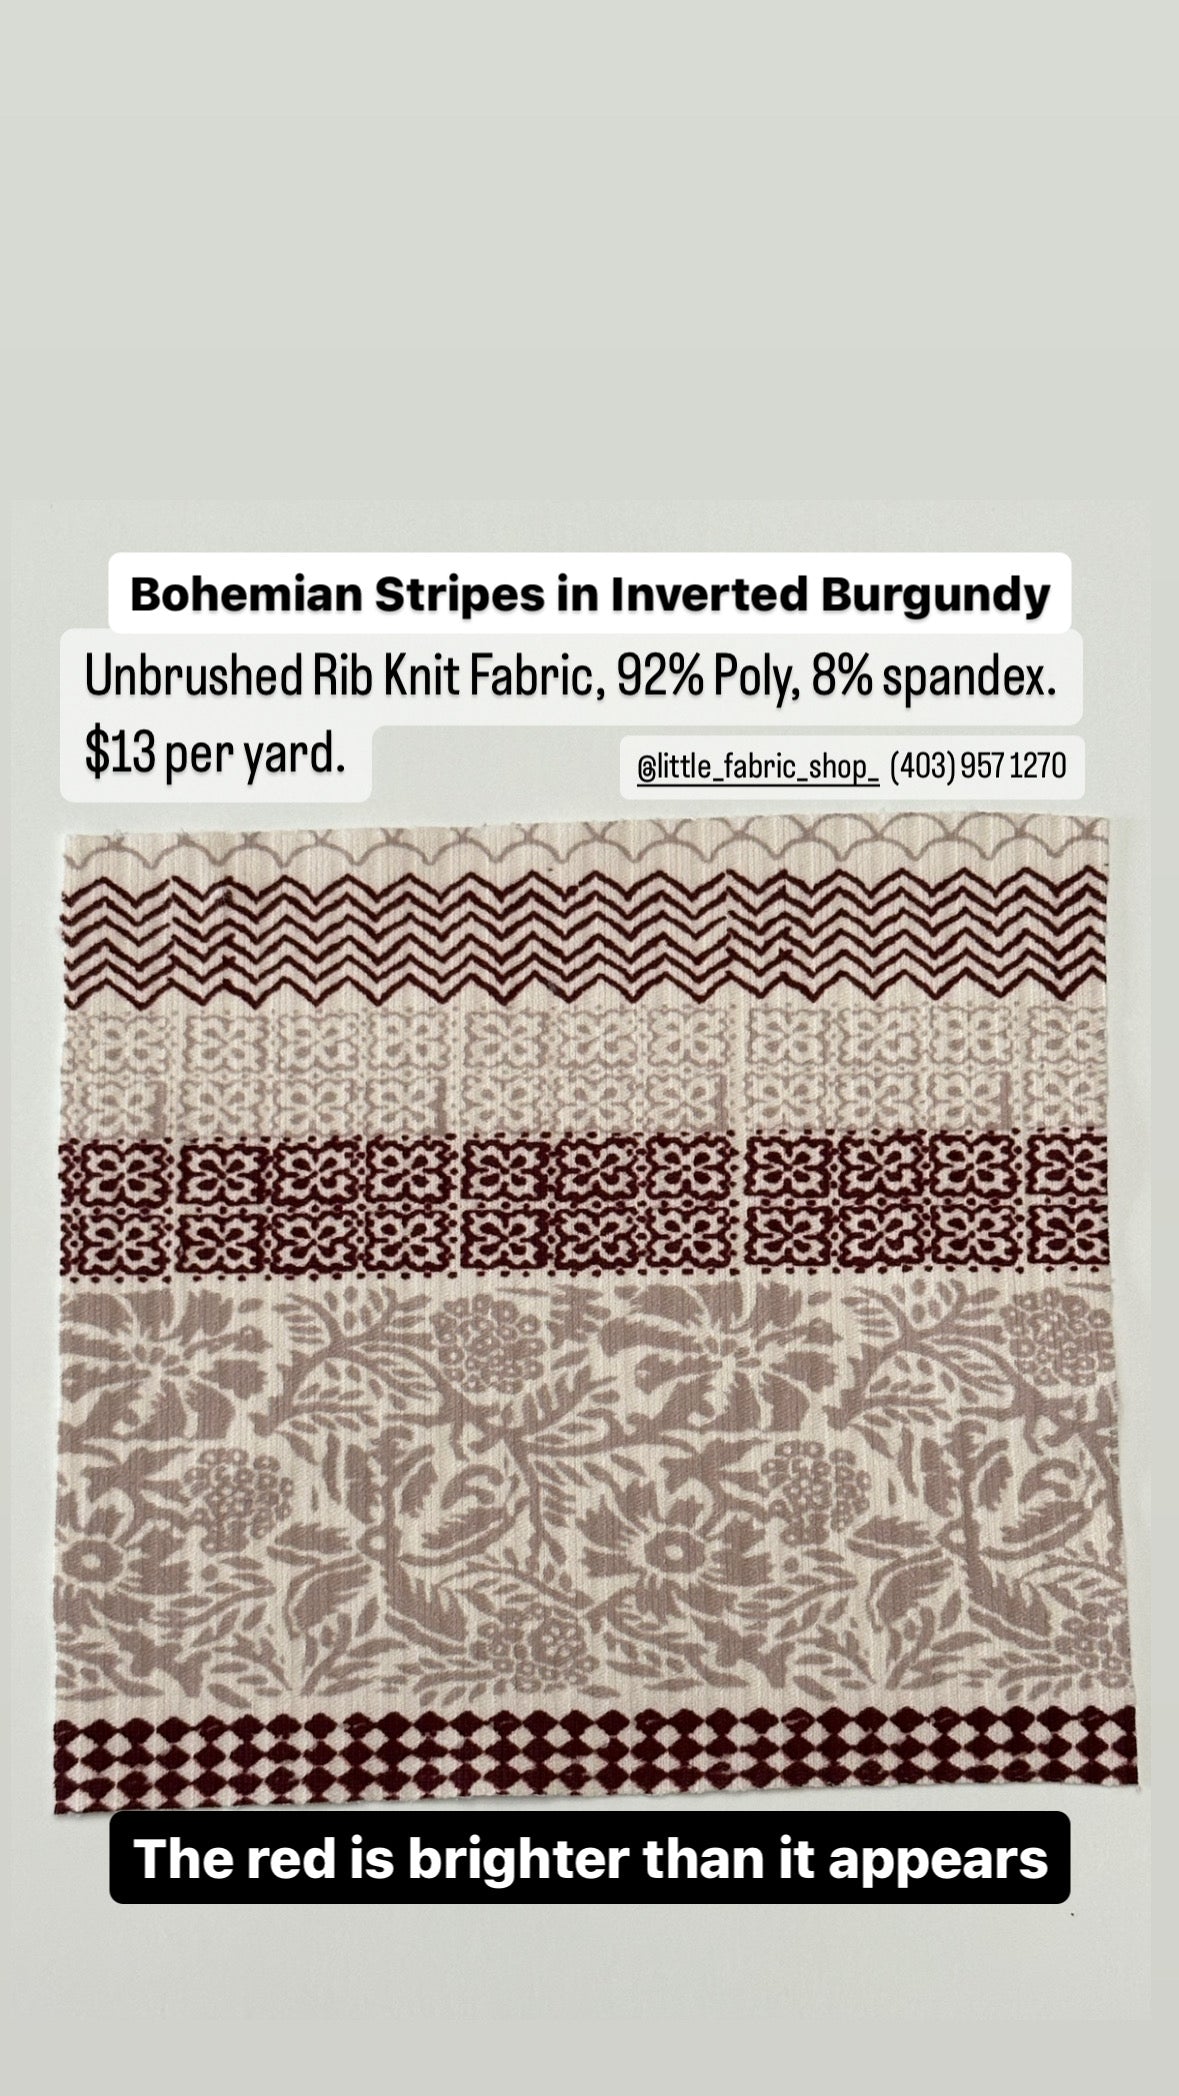 Bohemian Stripes in Inverted Burgundy on Unbrushed Rib Knit Fabric Sold by the 1/4 yard